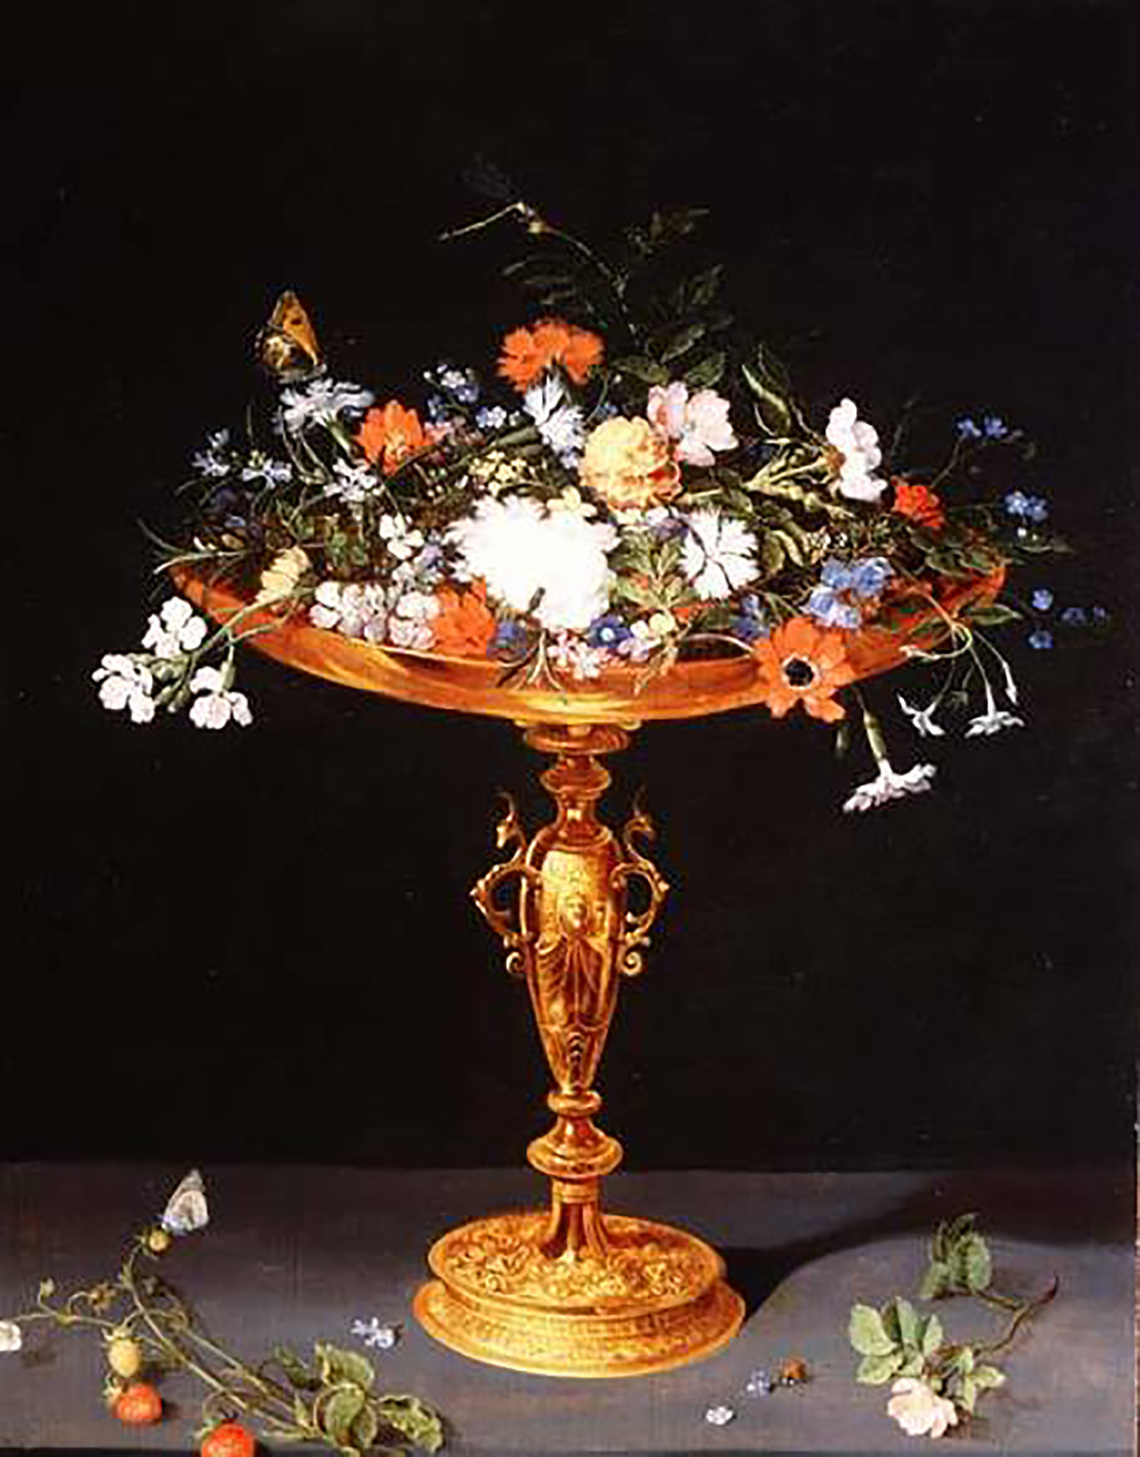 Flowers in a Tazza (Netherlands)